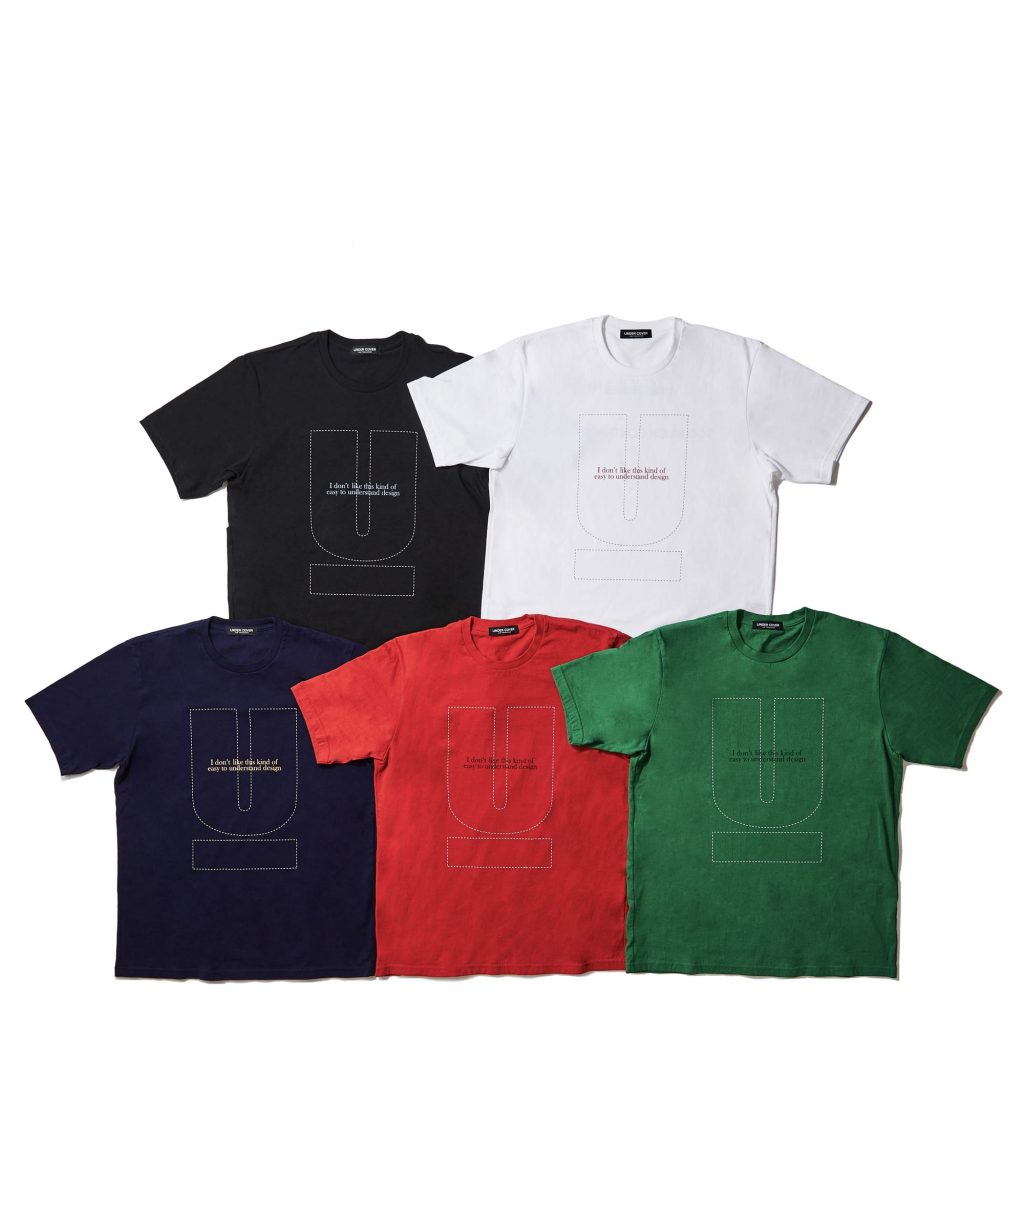 undercover-19aw-collection-launch-20190727-online-limited-tee